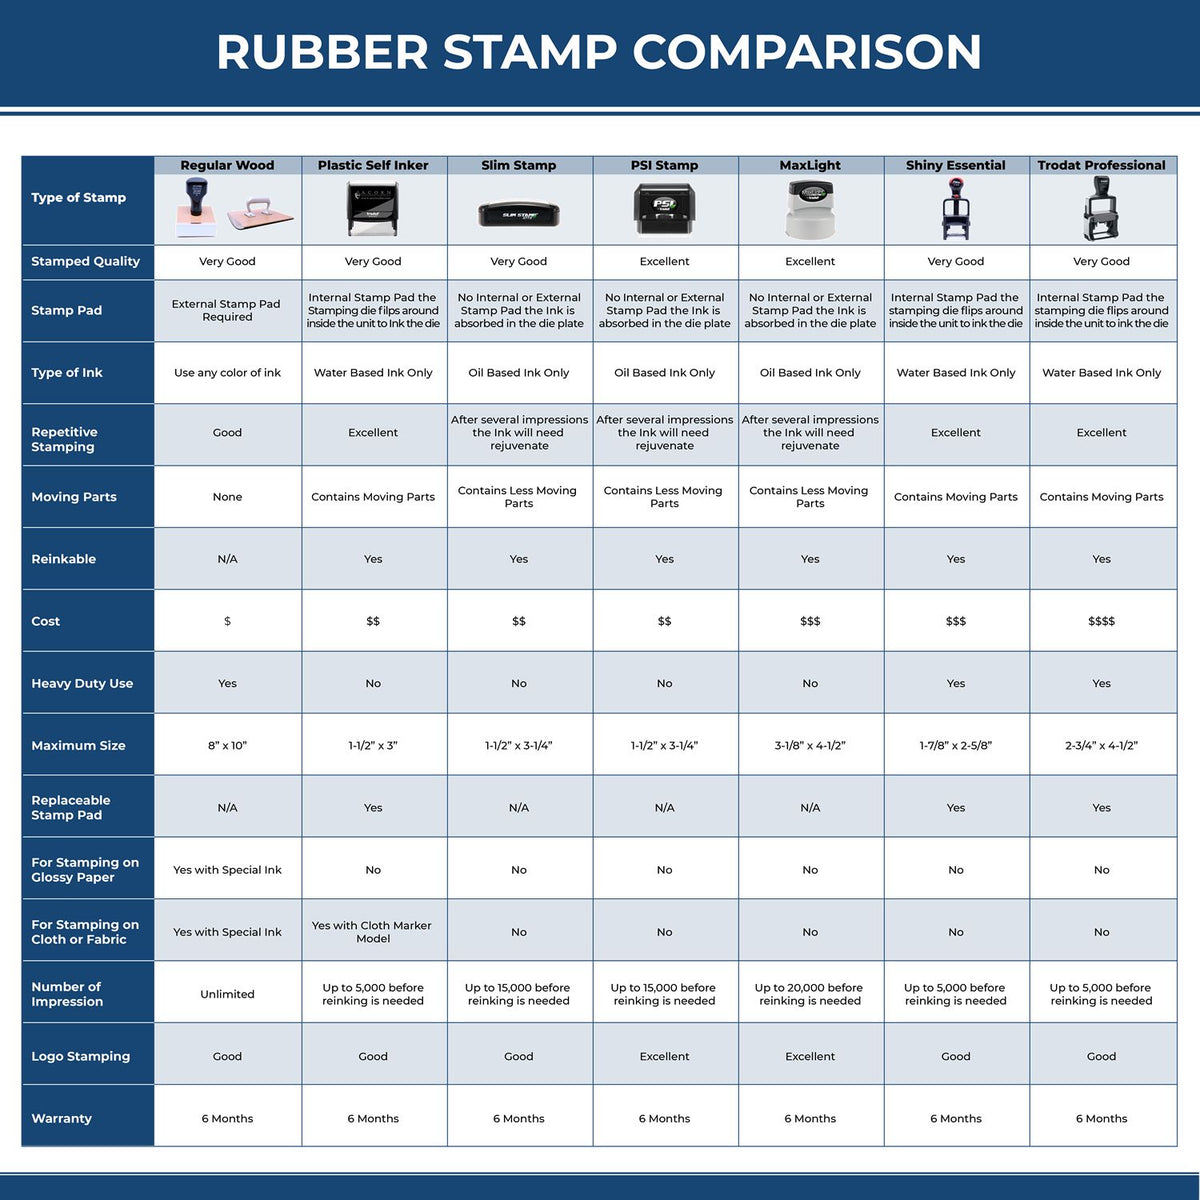 Large Personal Rubber Stamp 4142R Rubber Stamp Comparison